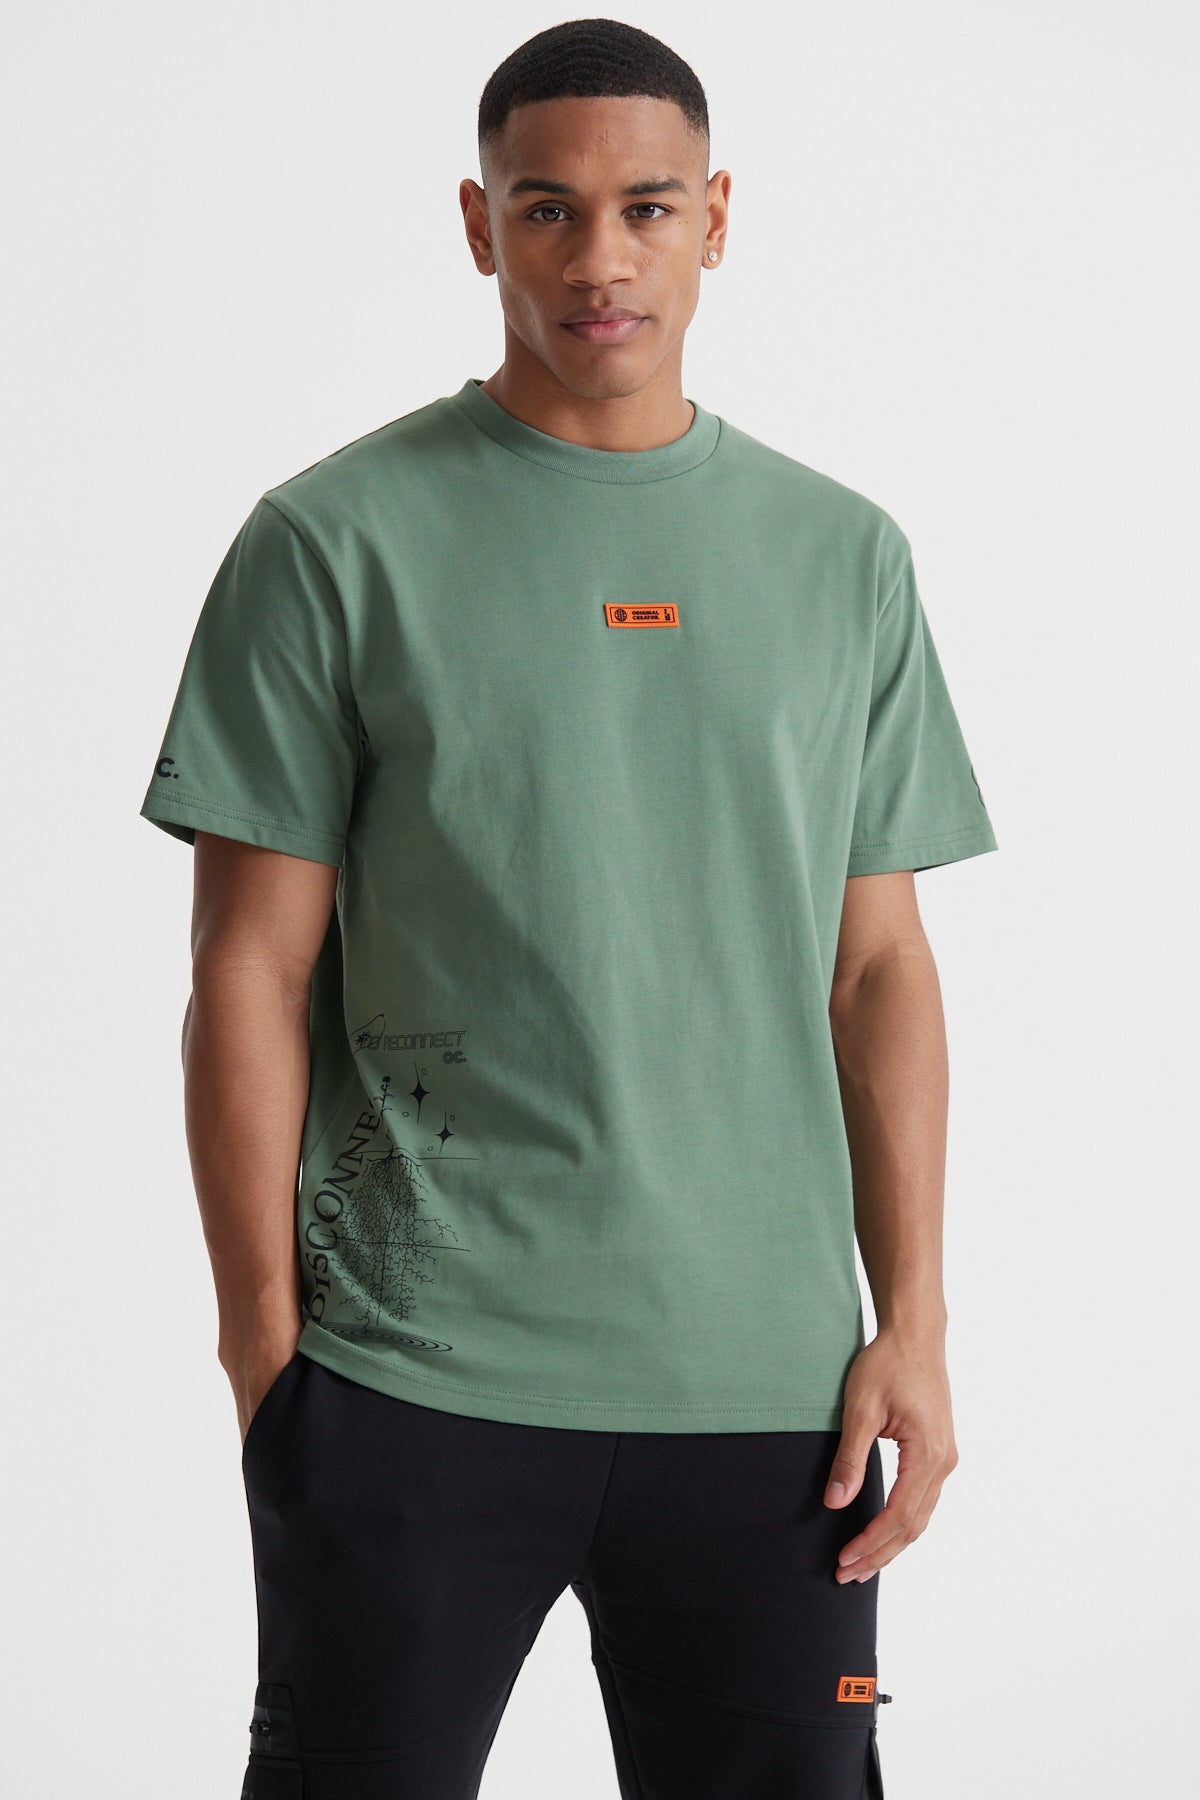 Disconnect to Reconnect T-shirt - Jungle Green